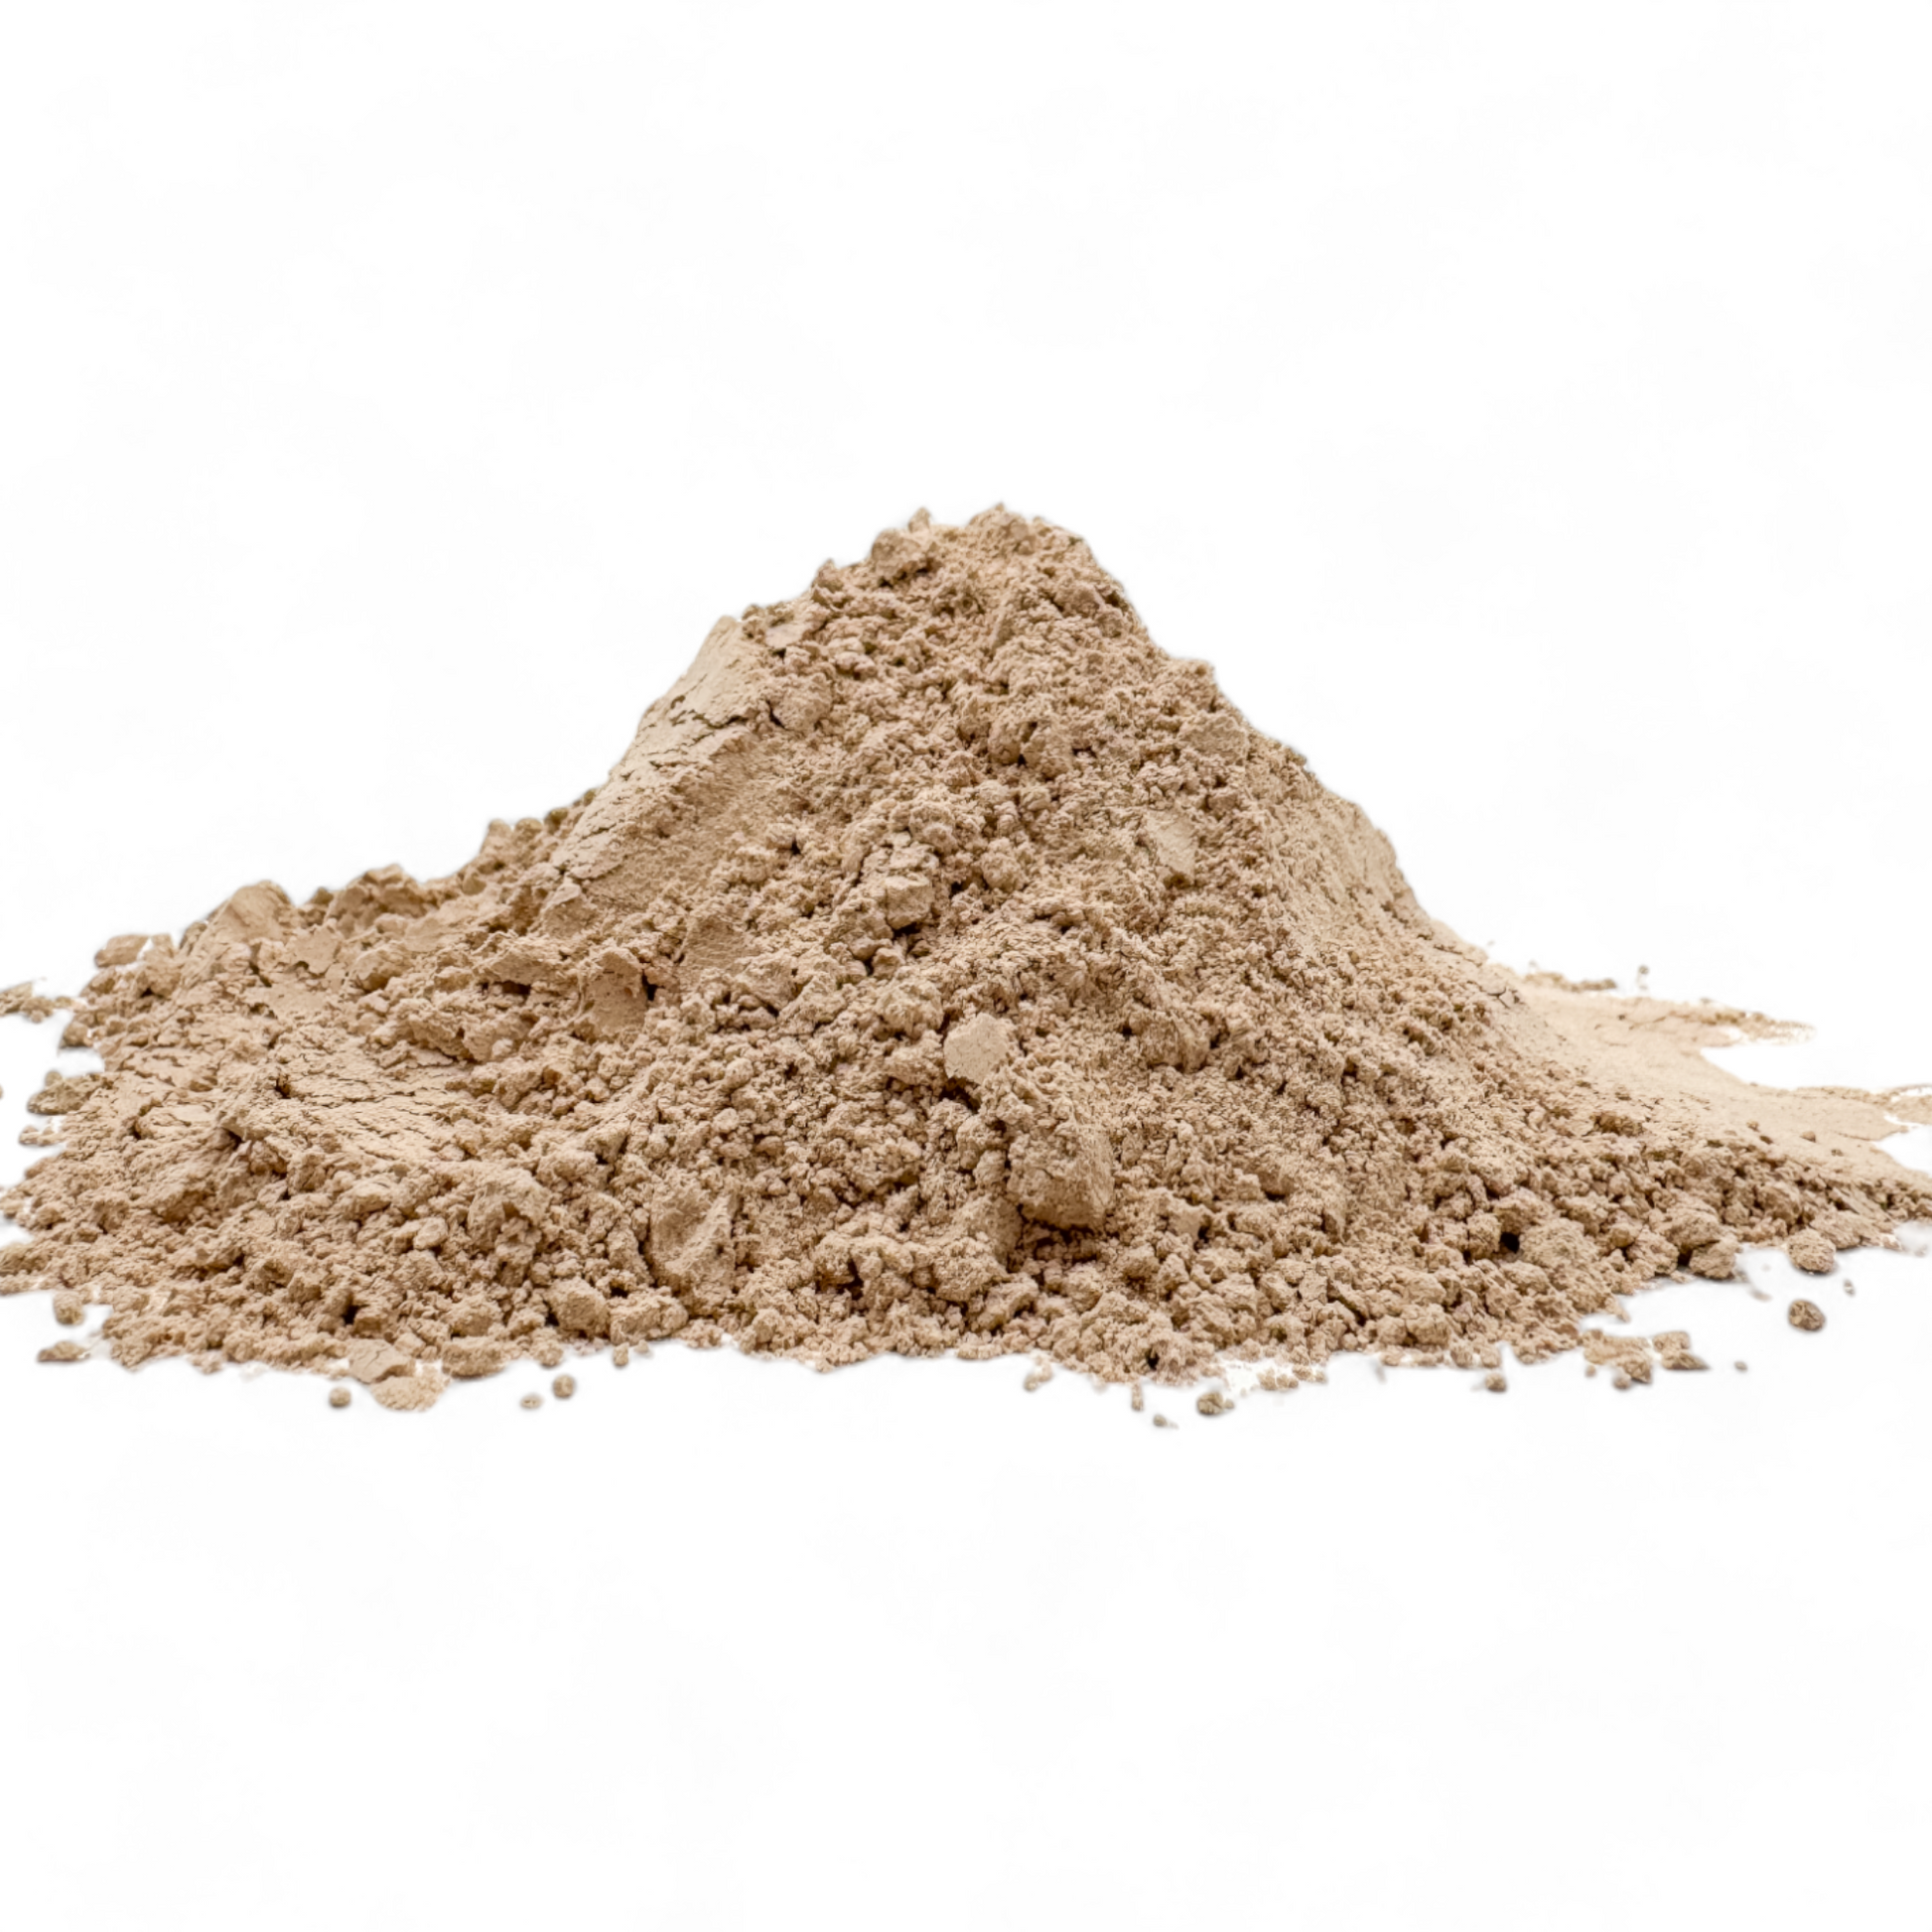 Micronized Azomite mineral powder on a white background